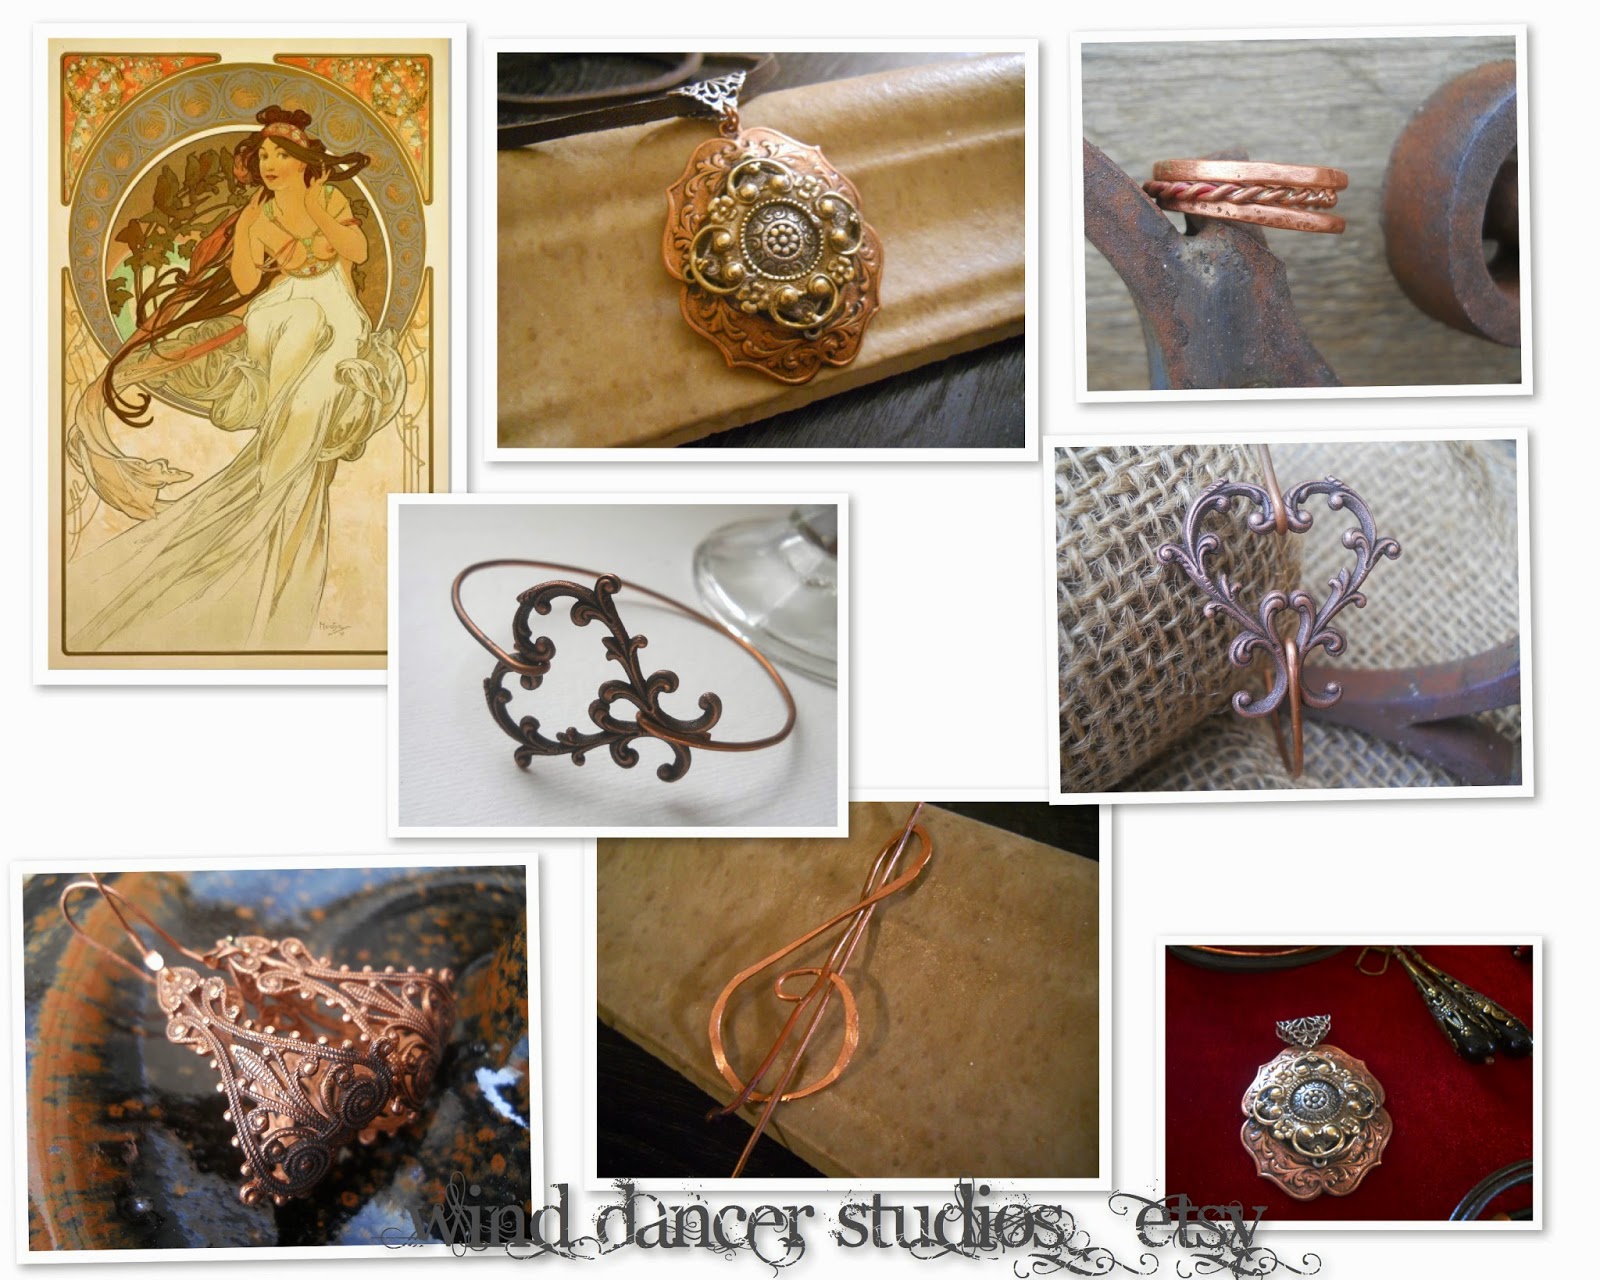 mucha's musings: the Arts Collection: Music, hand crafted jewelry by Wind Dancer Studios on Etsy